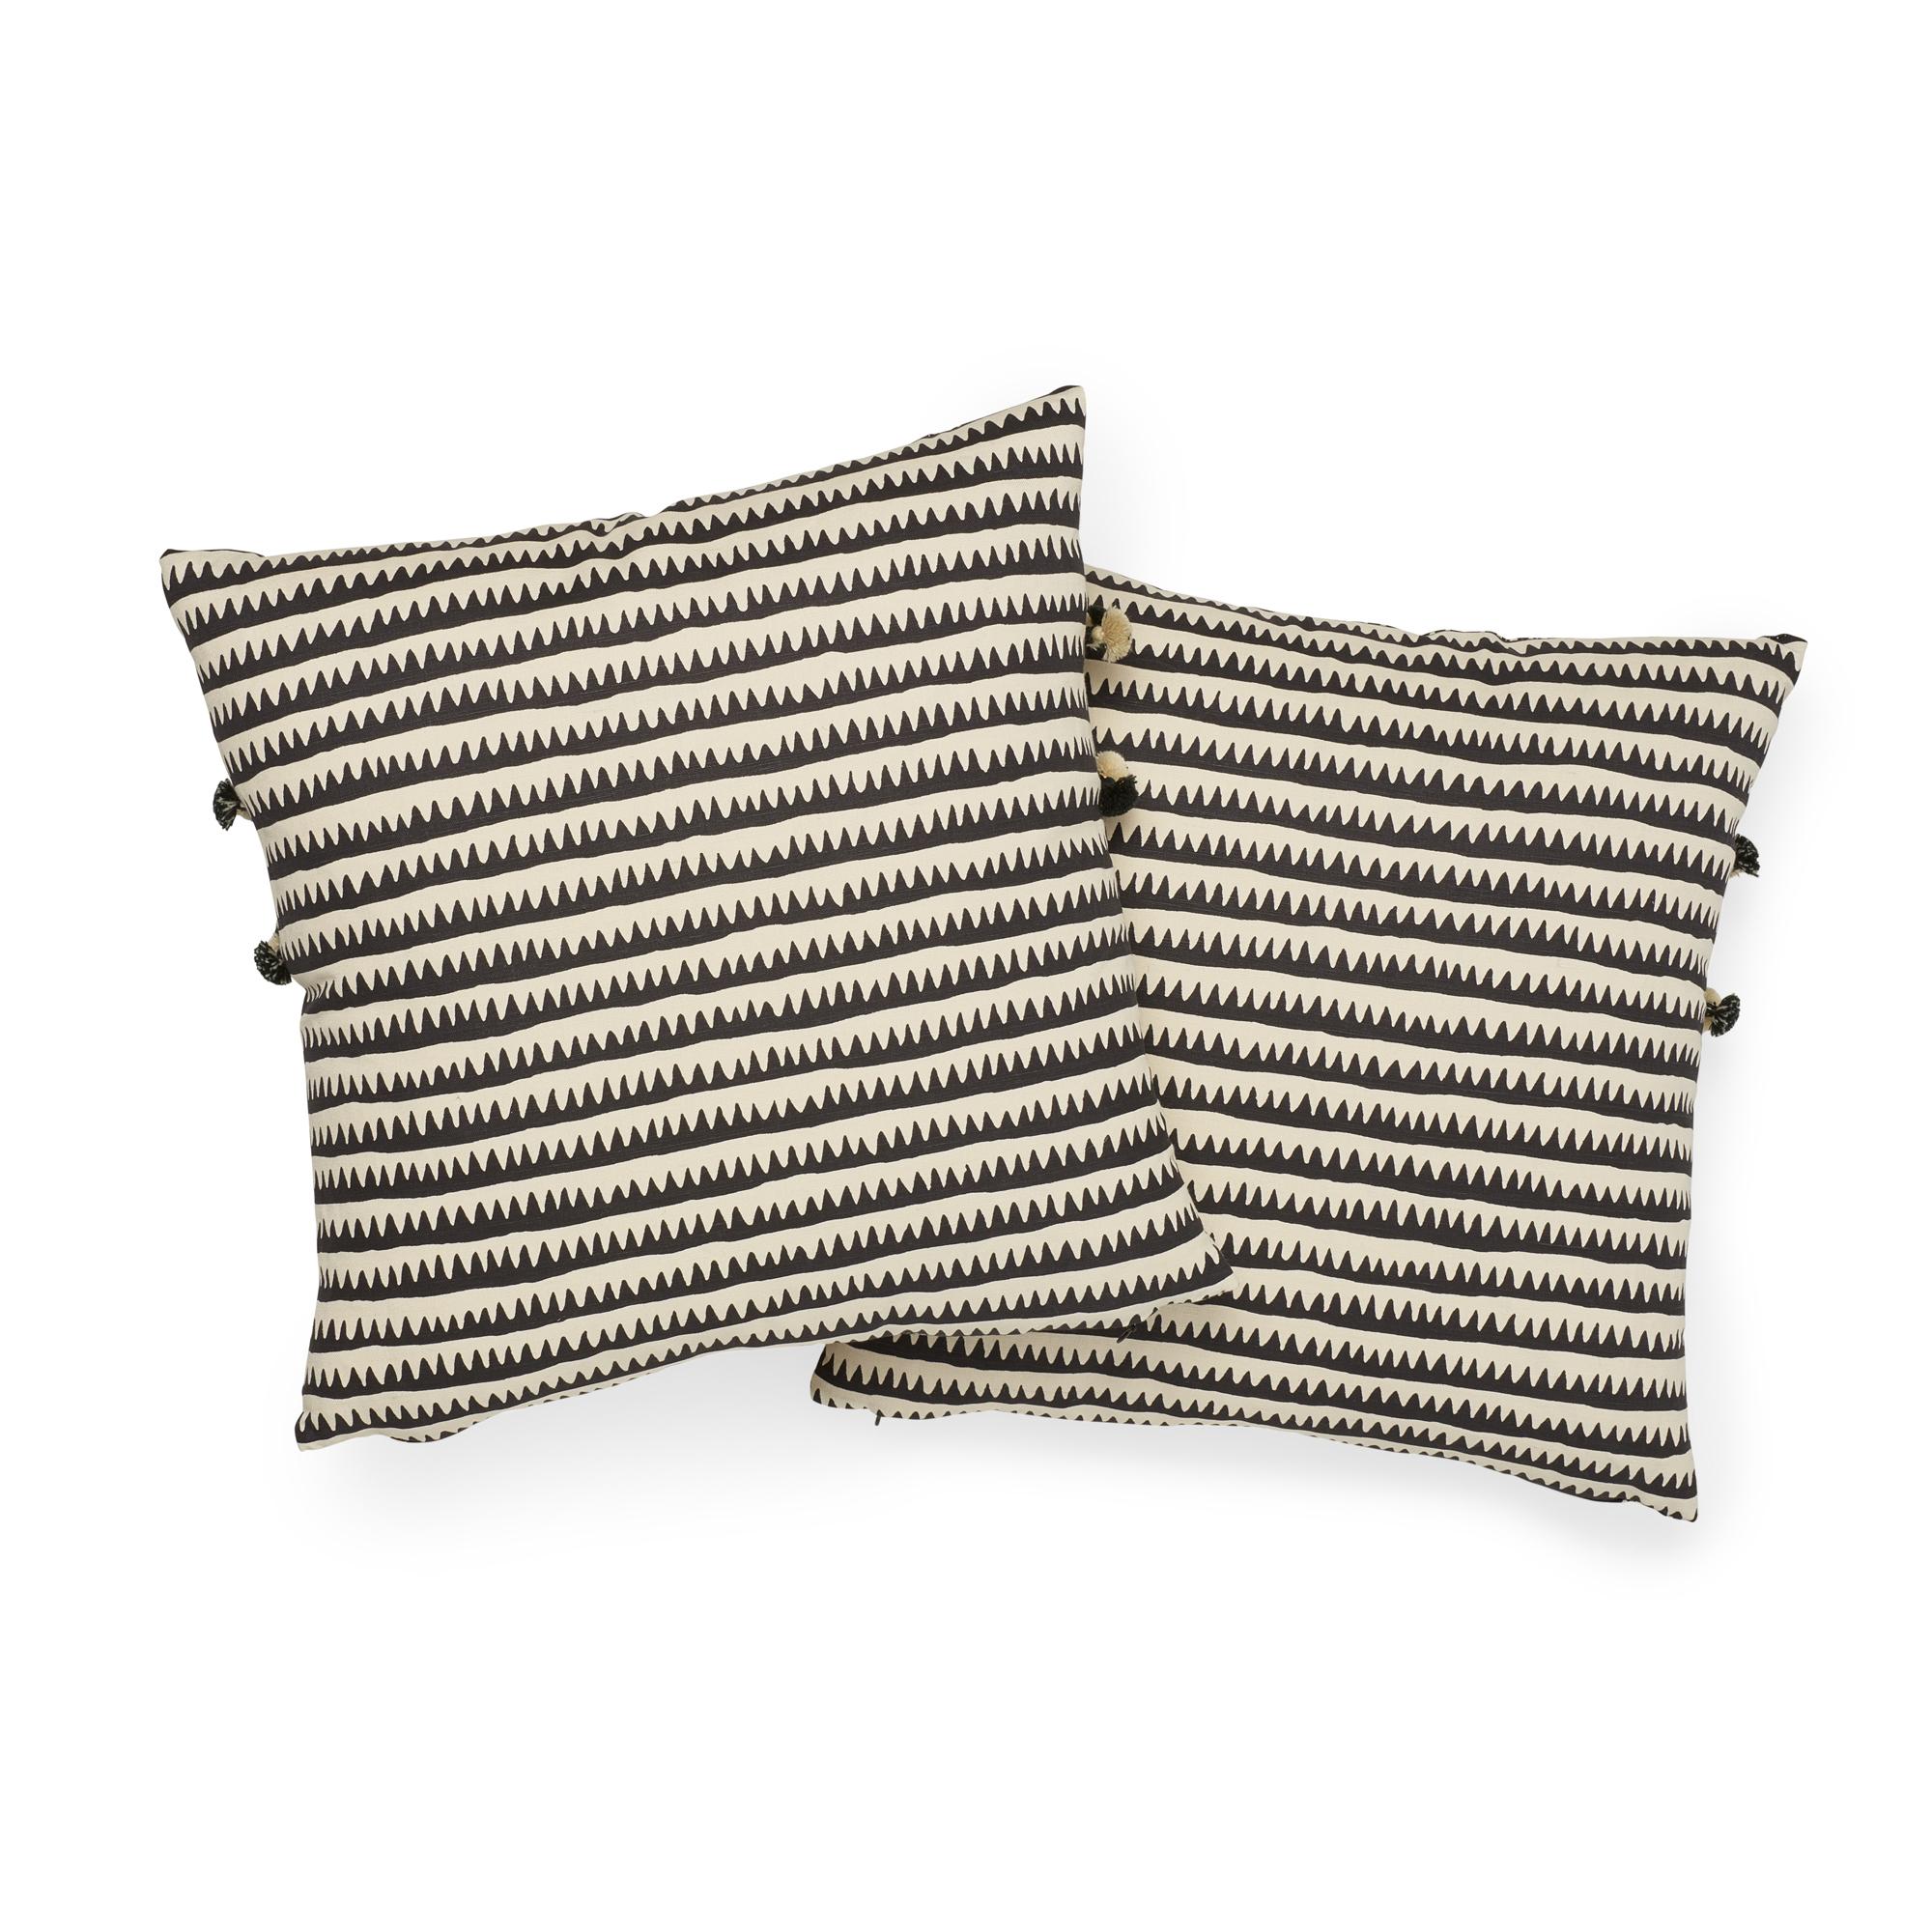 Schumacher Corfu Stripe Black Linen Cotton Two-Sided Pillow, Maracana Pom Tape In New Condition For Sale In New York, NY